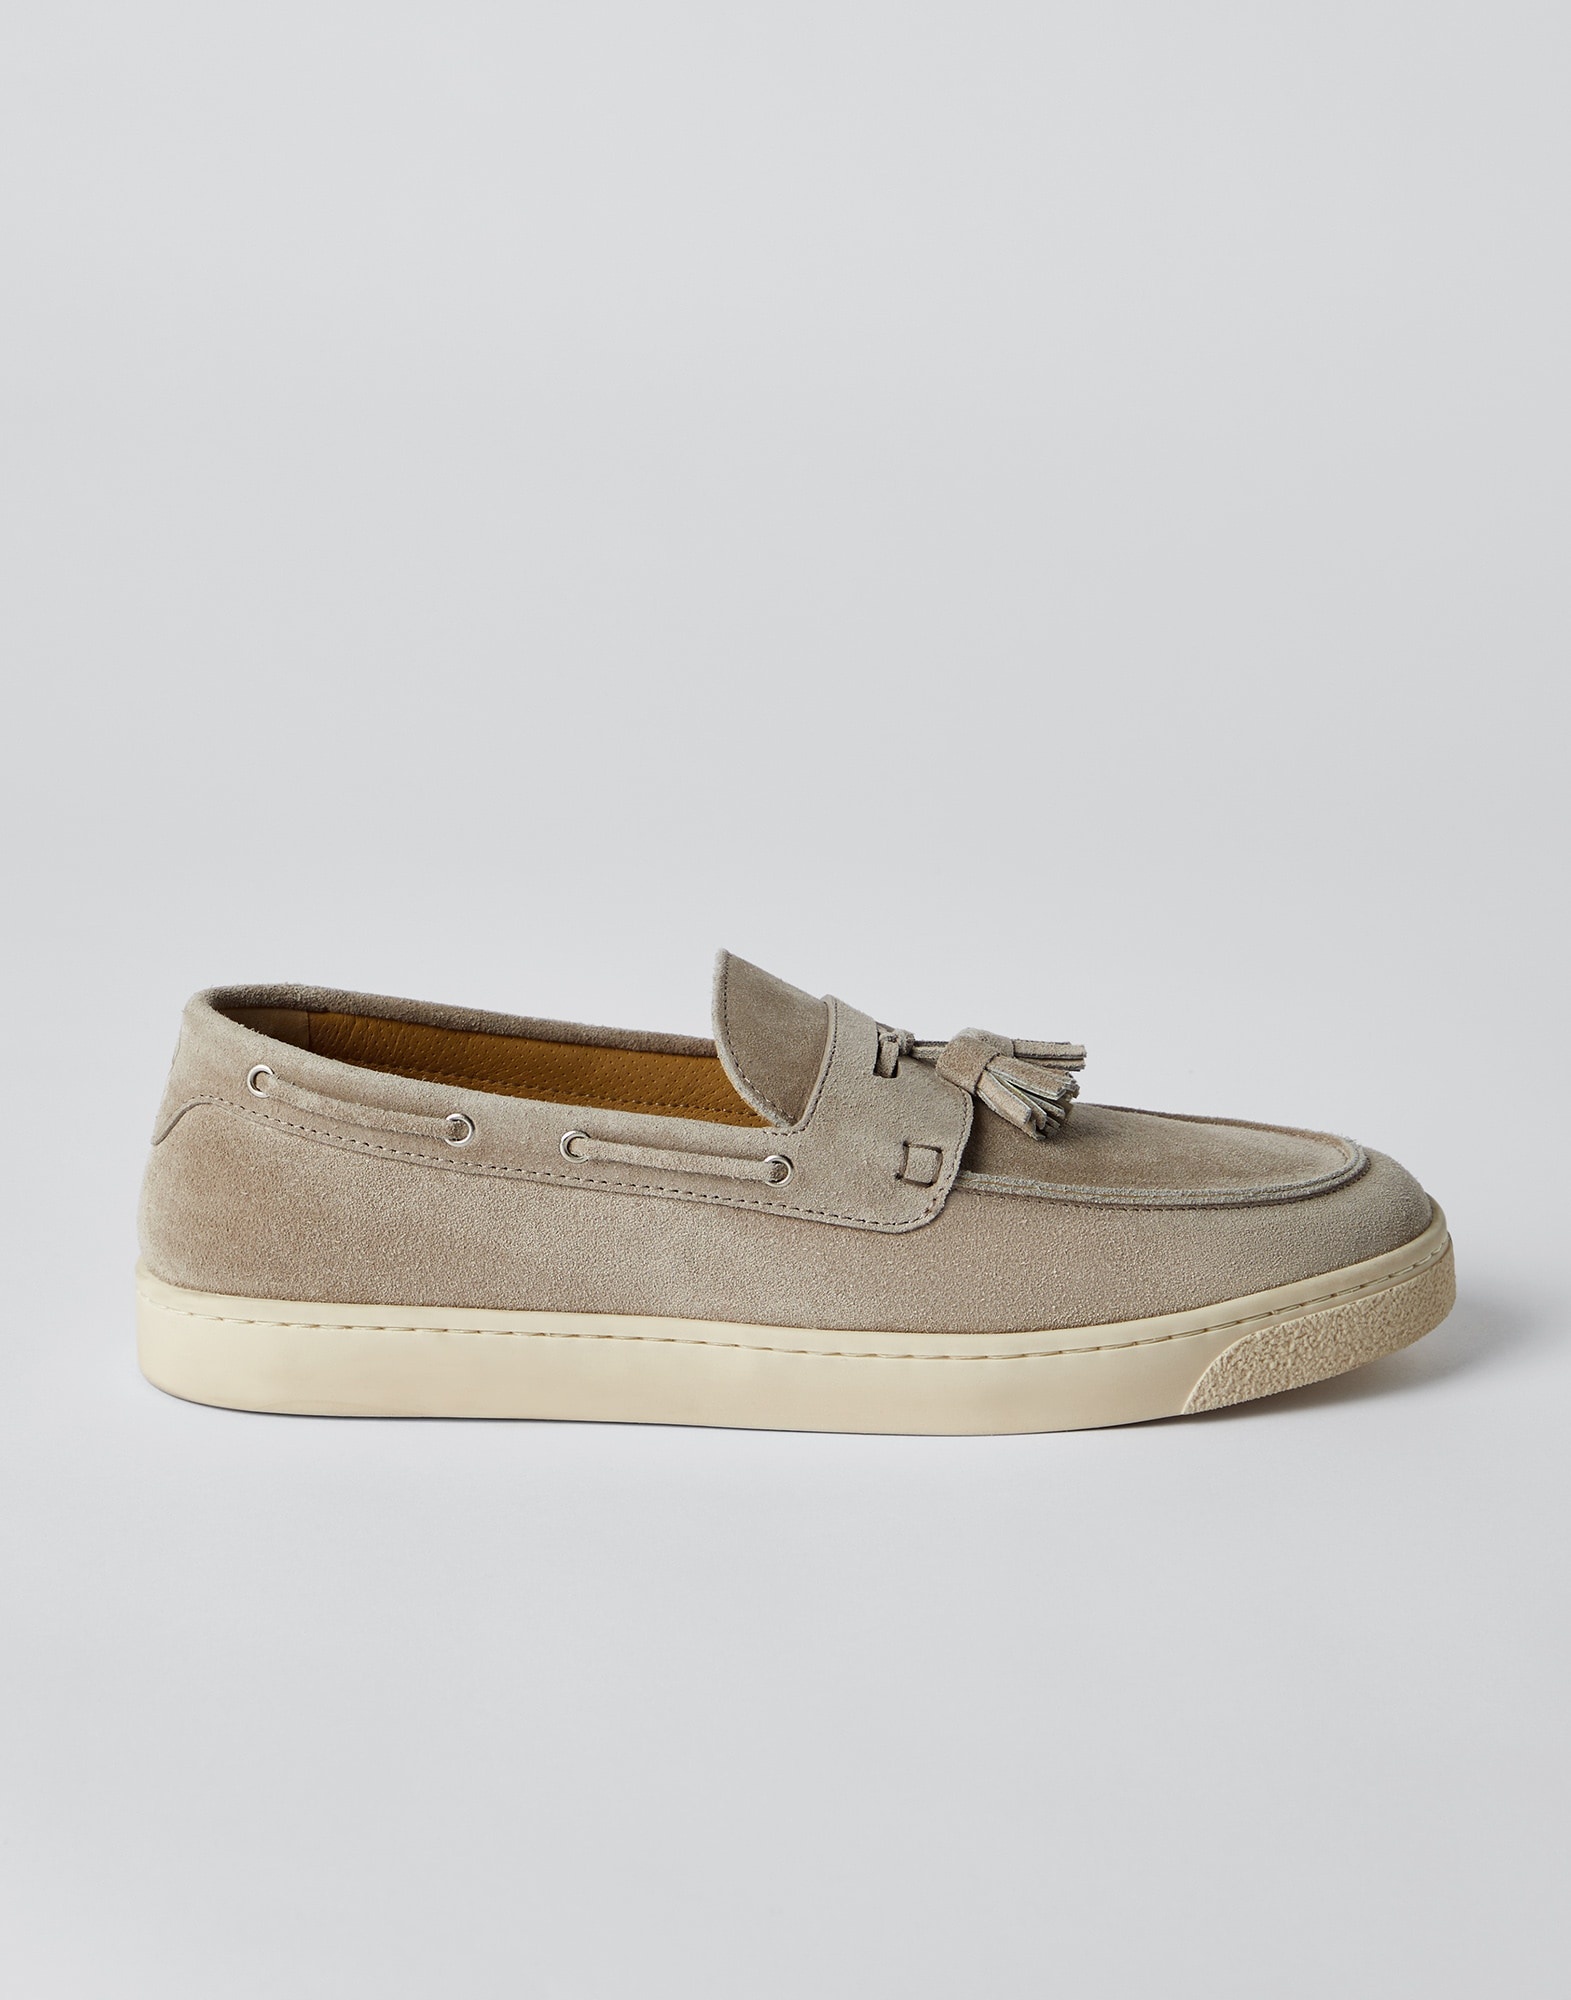 Suede loafer sneakers with tassels and natural rubber sole - 1